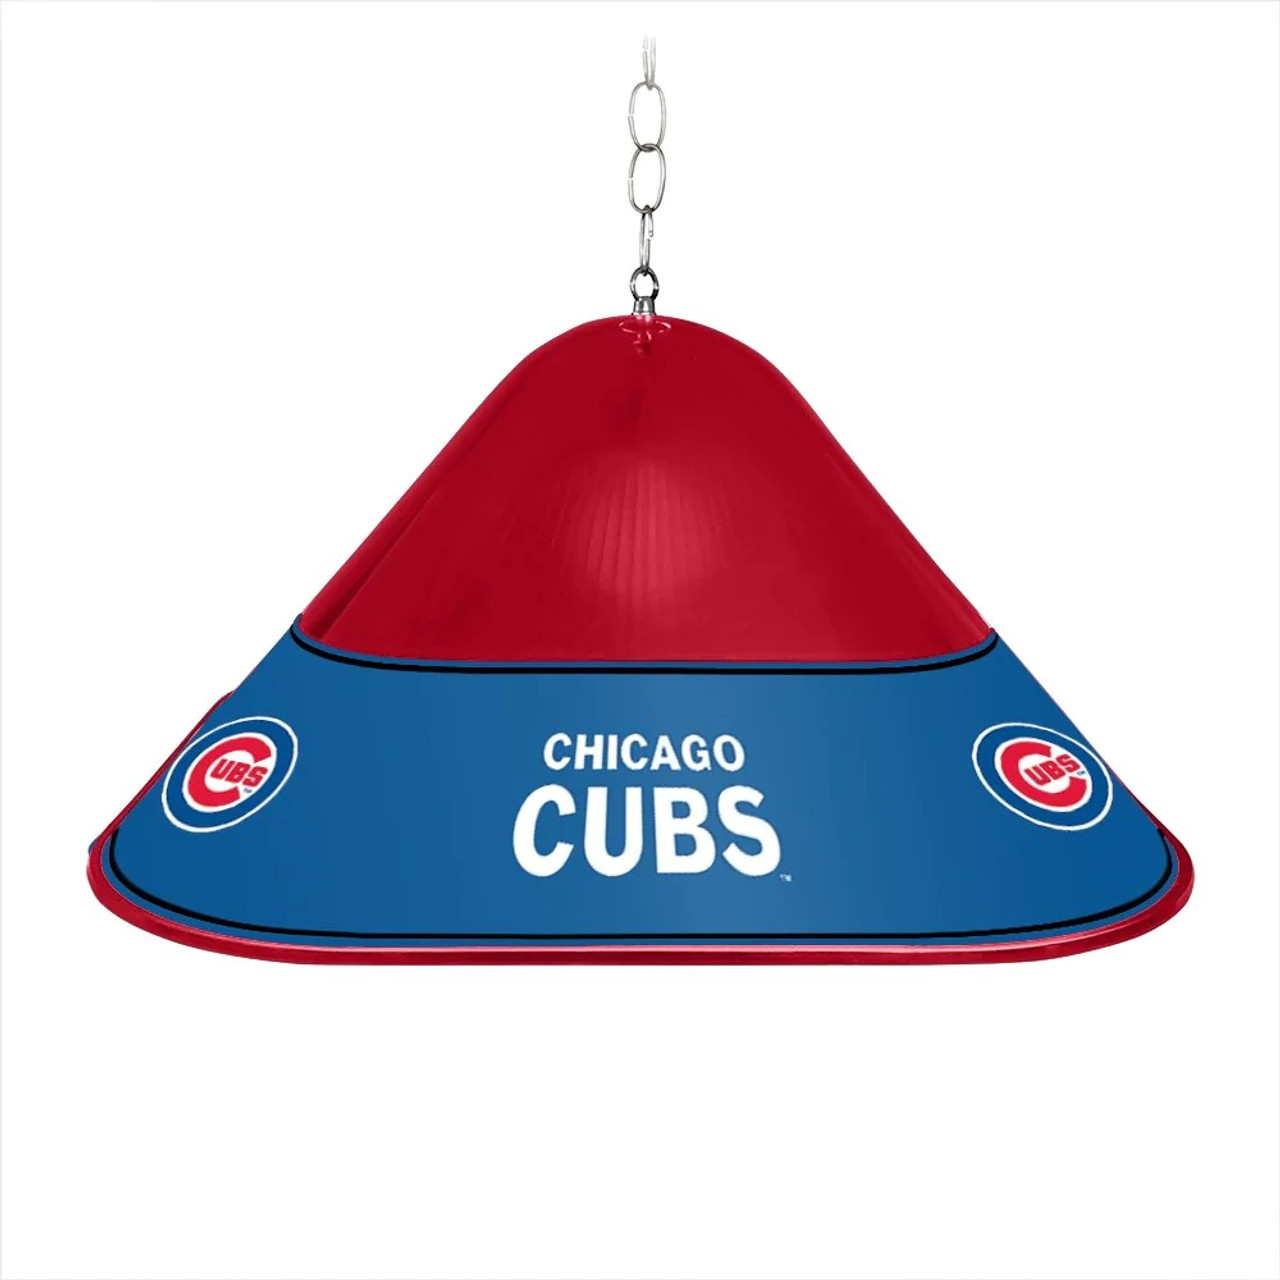 MBCUBS-410-01A, Chicago, Chi, Cubbies, Cubby's, Cubs, Blue/Red  Game  Table  Light  Lamp, MLB, 704384965725